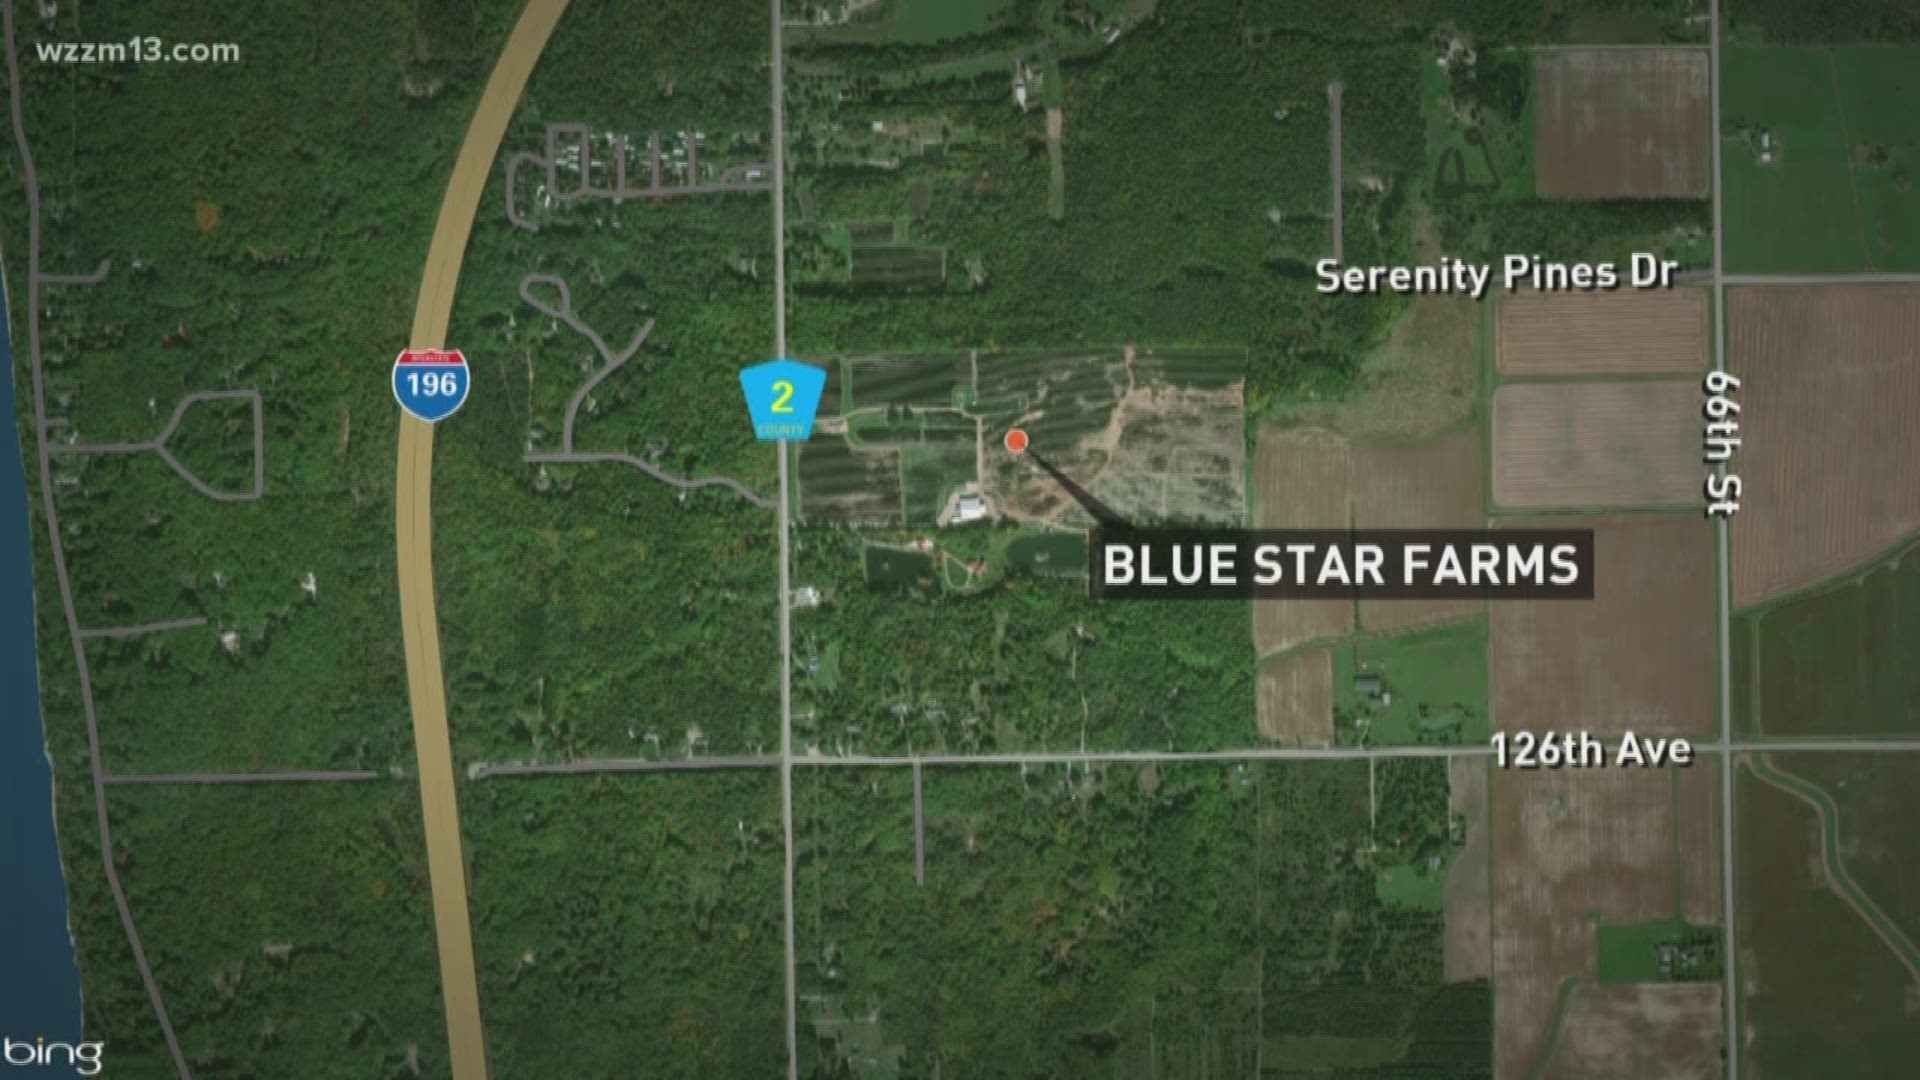 Blue Star Farms settles with workers